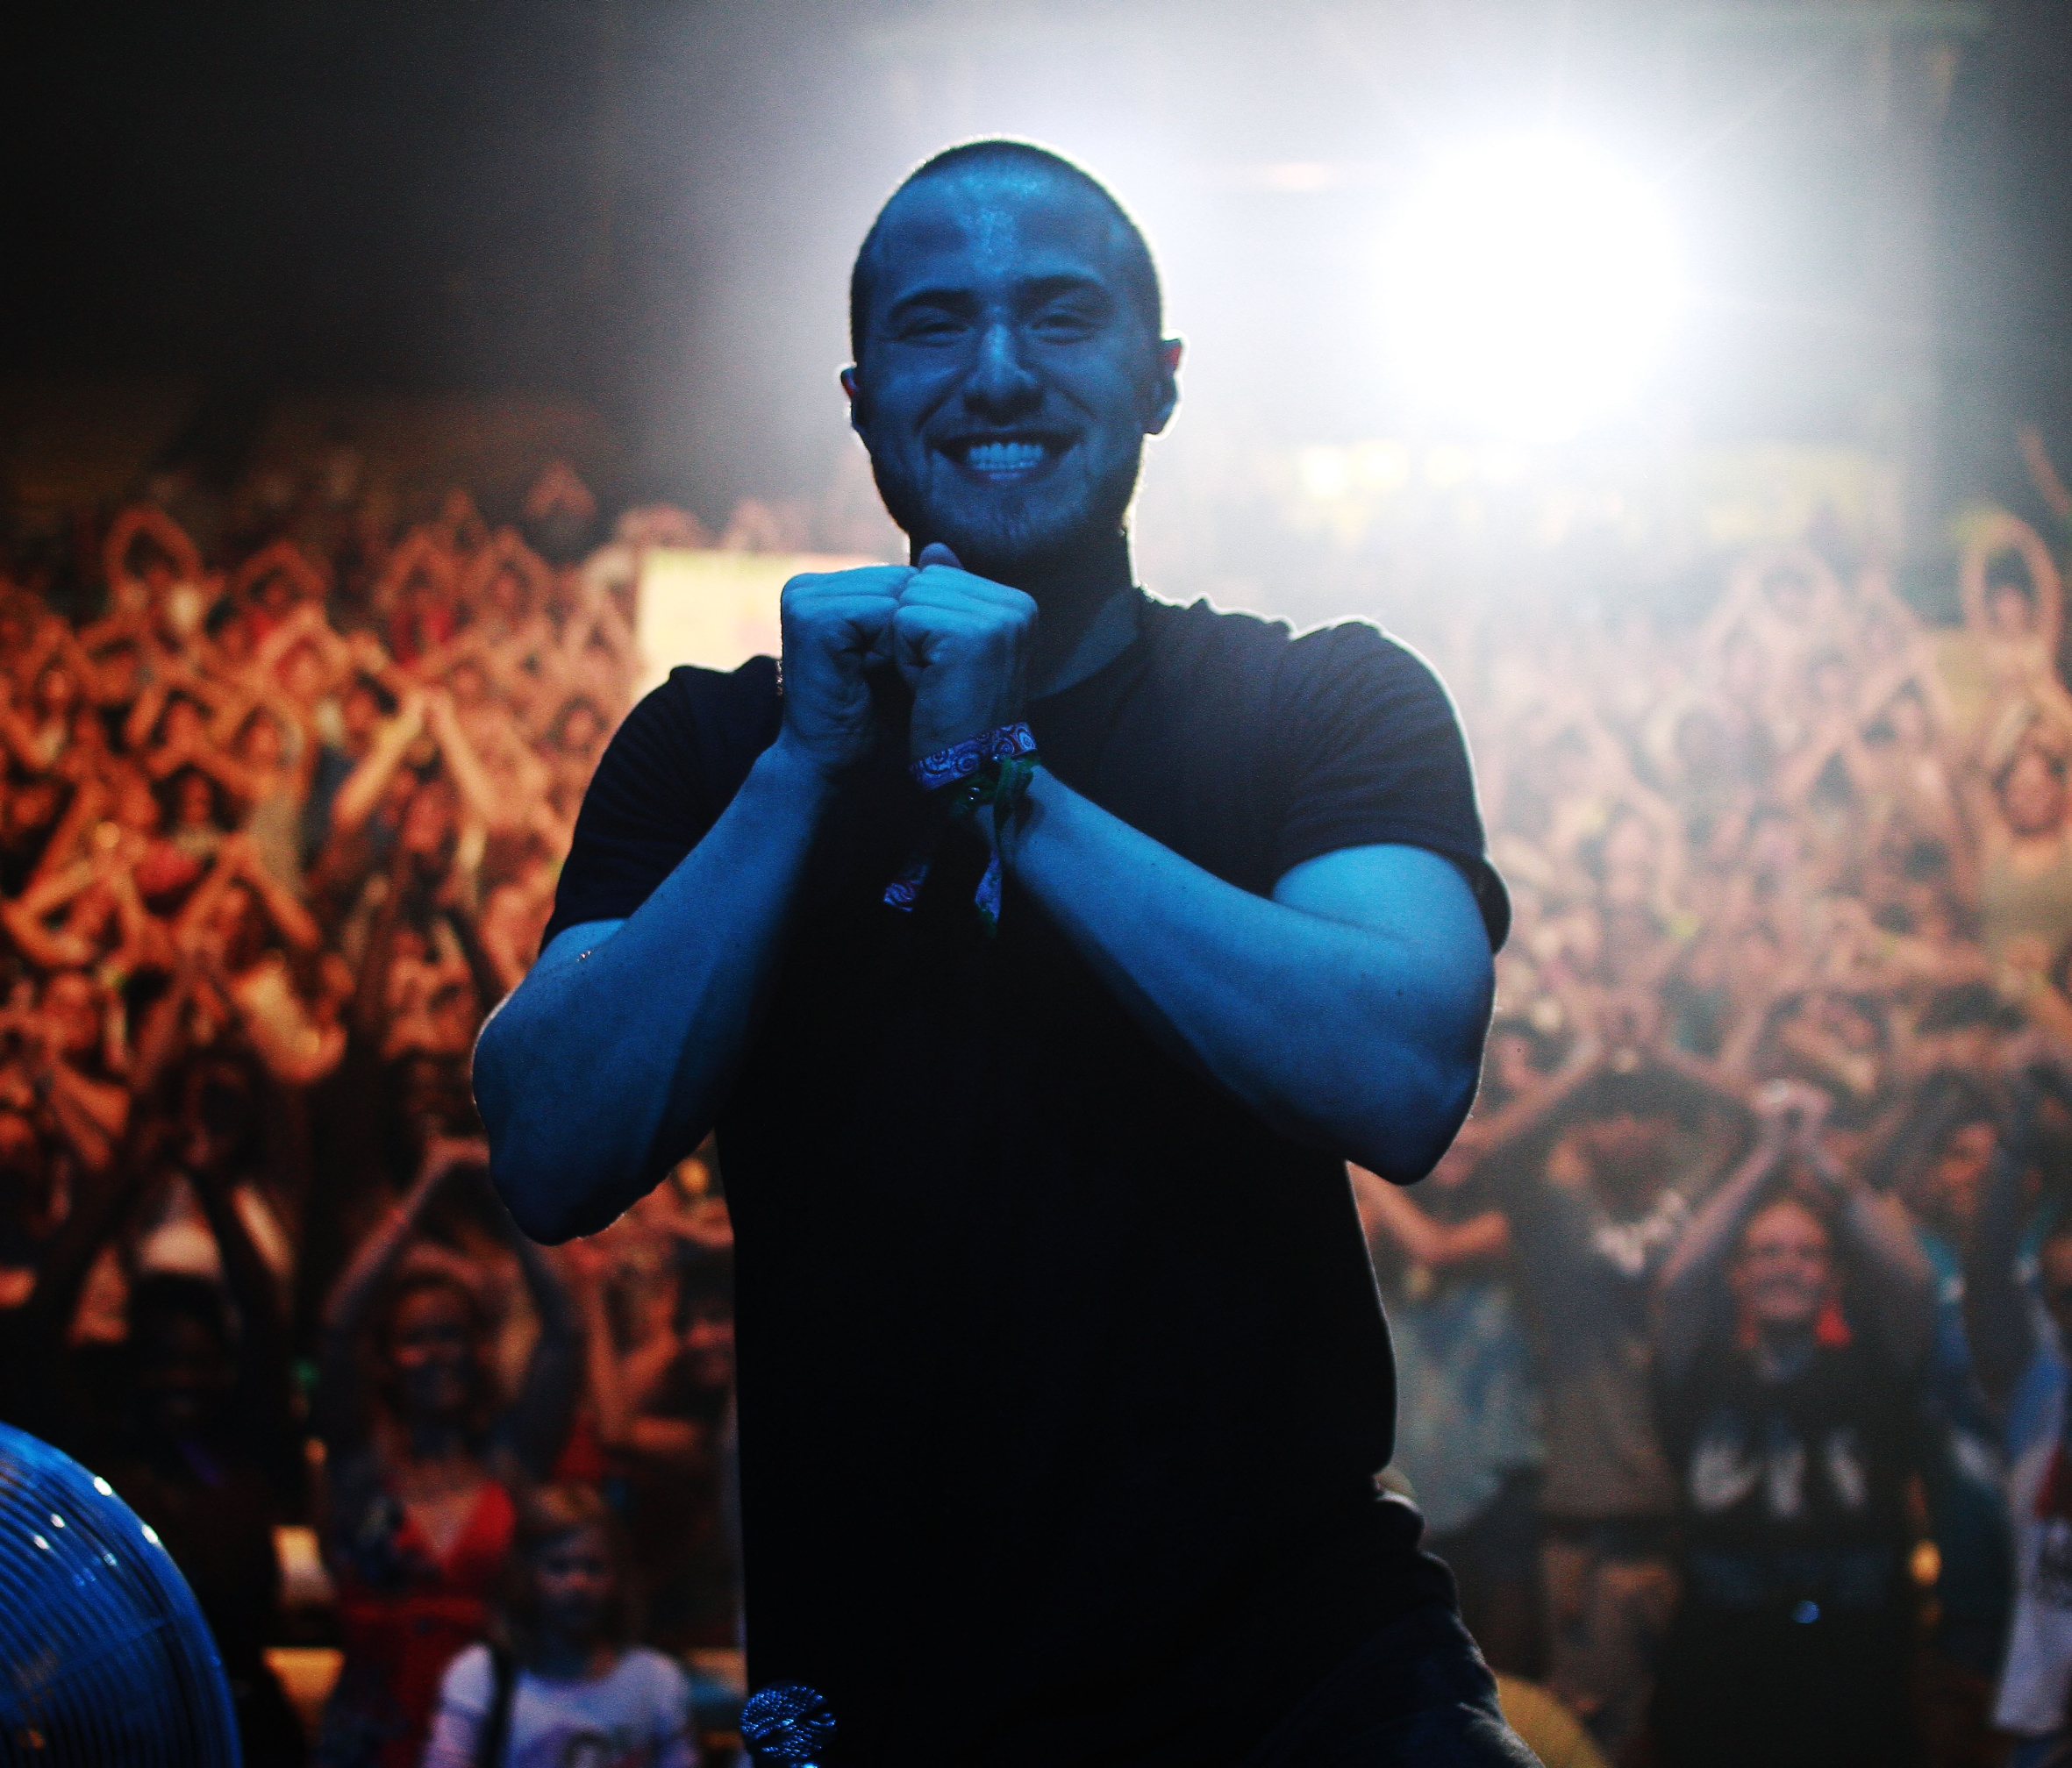 Mike Posner at Six Flags Over Texas 8/4/11
BRAINS UP!
Photo taken by Nicholas Black.
